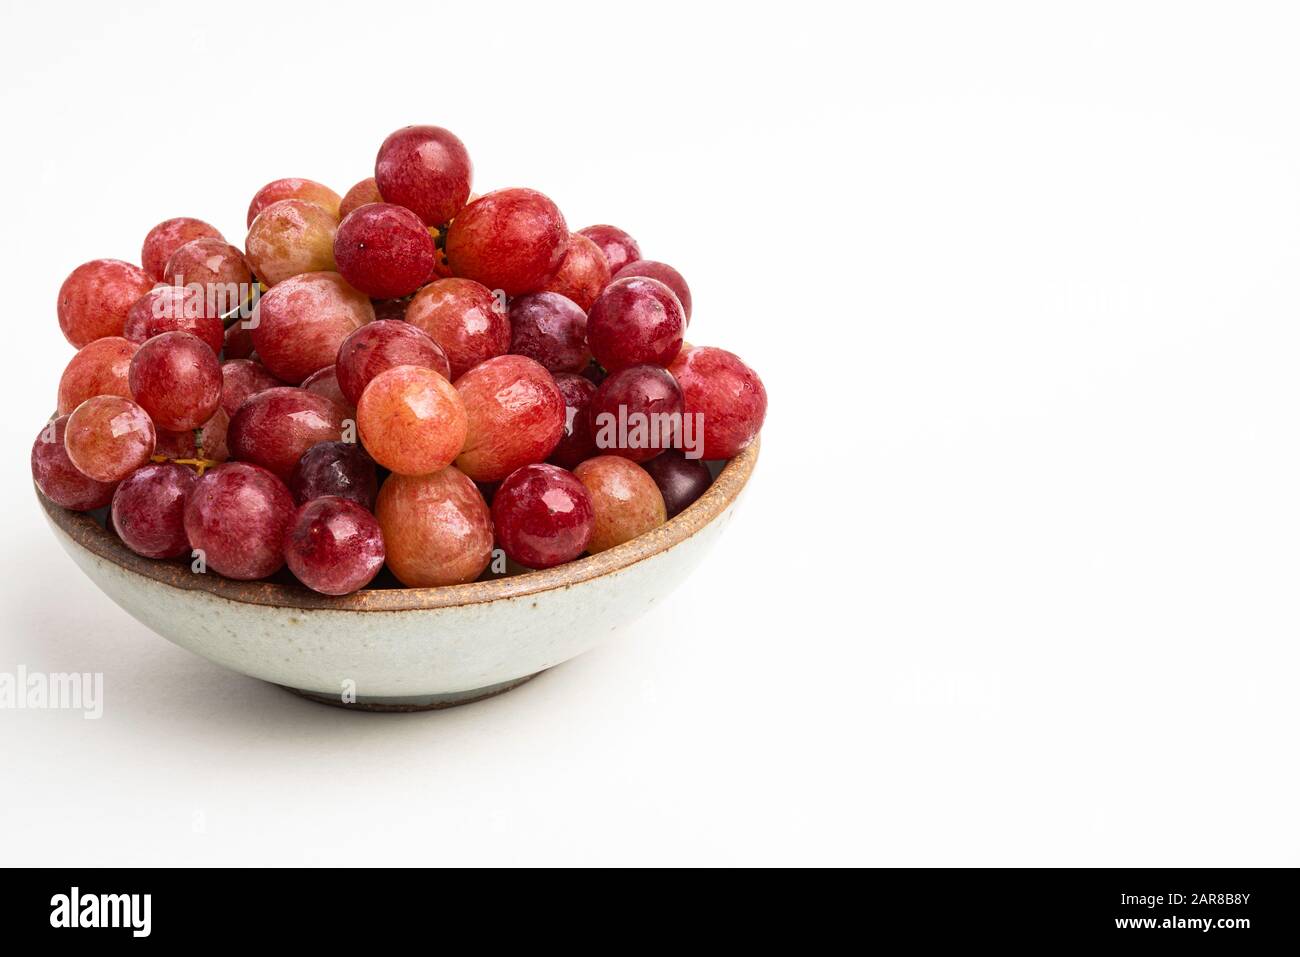 A bunch of fresh red grapes bunched on a small ceramic bowl set on a plain white background. Stock Photo